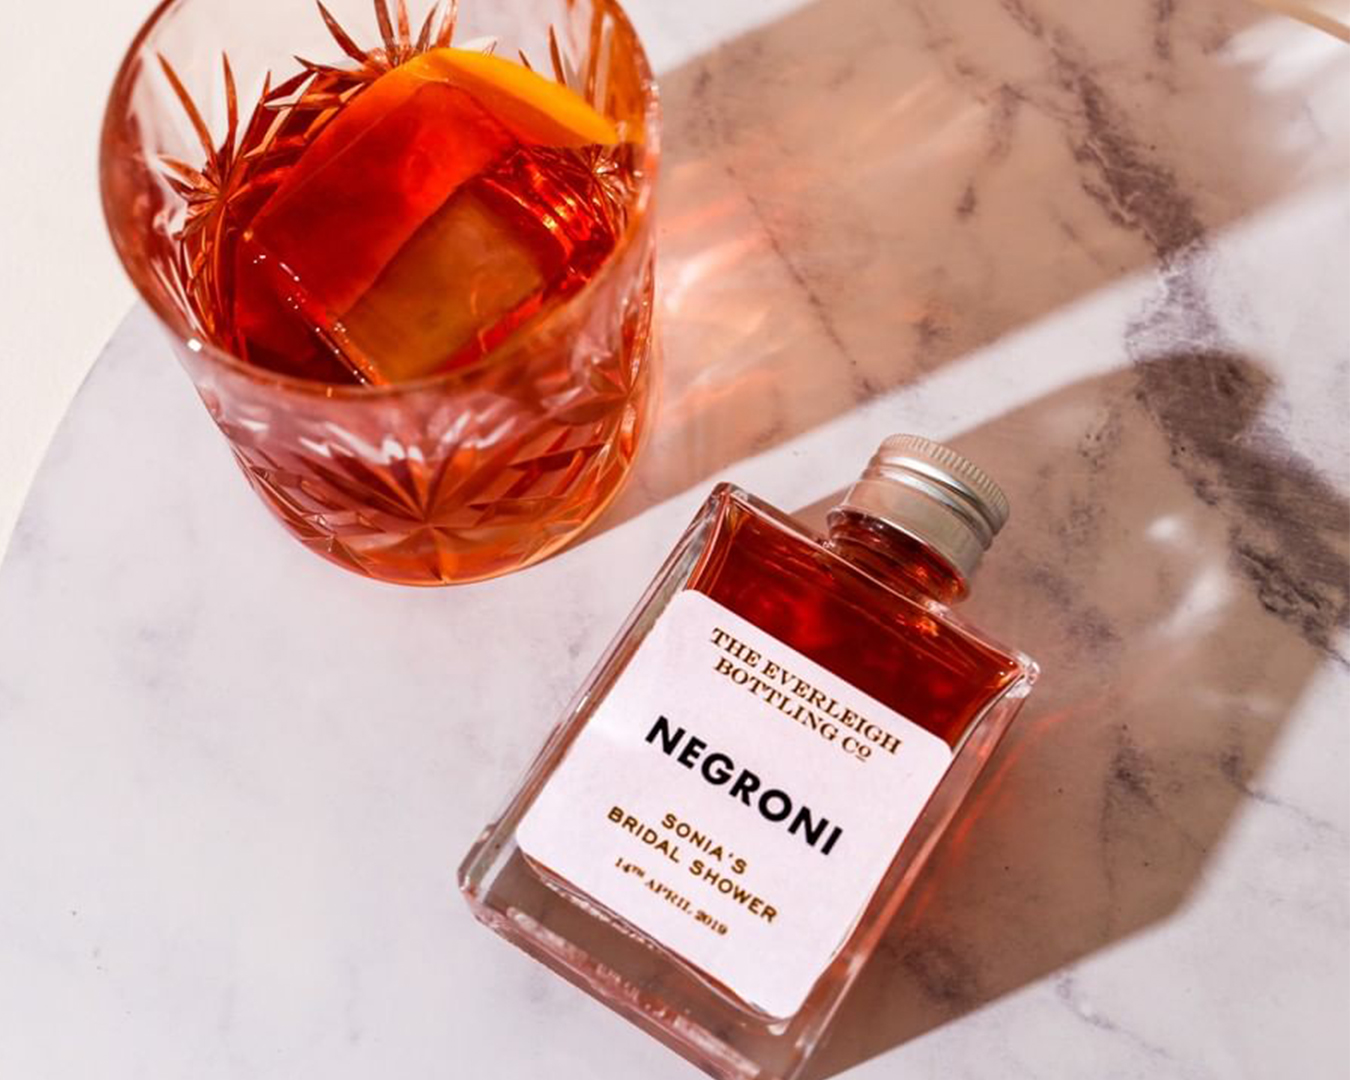 A glass and small bottle of negroni lay on a marble table.